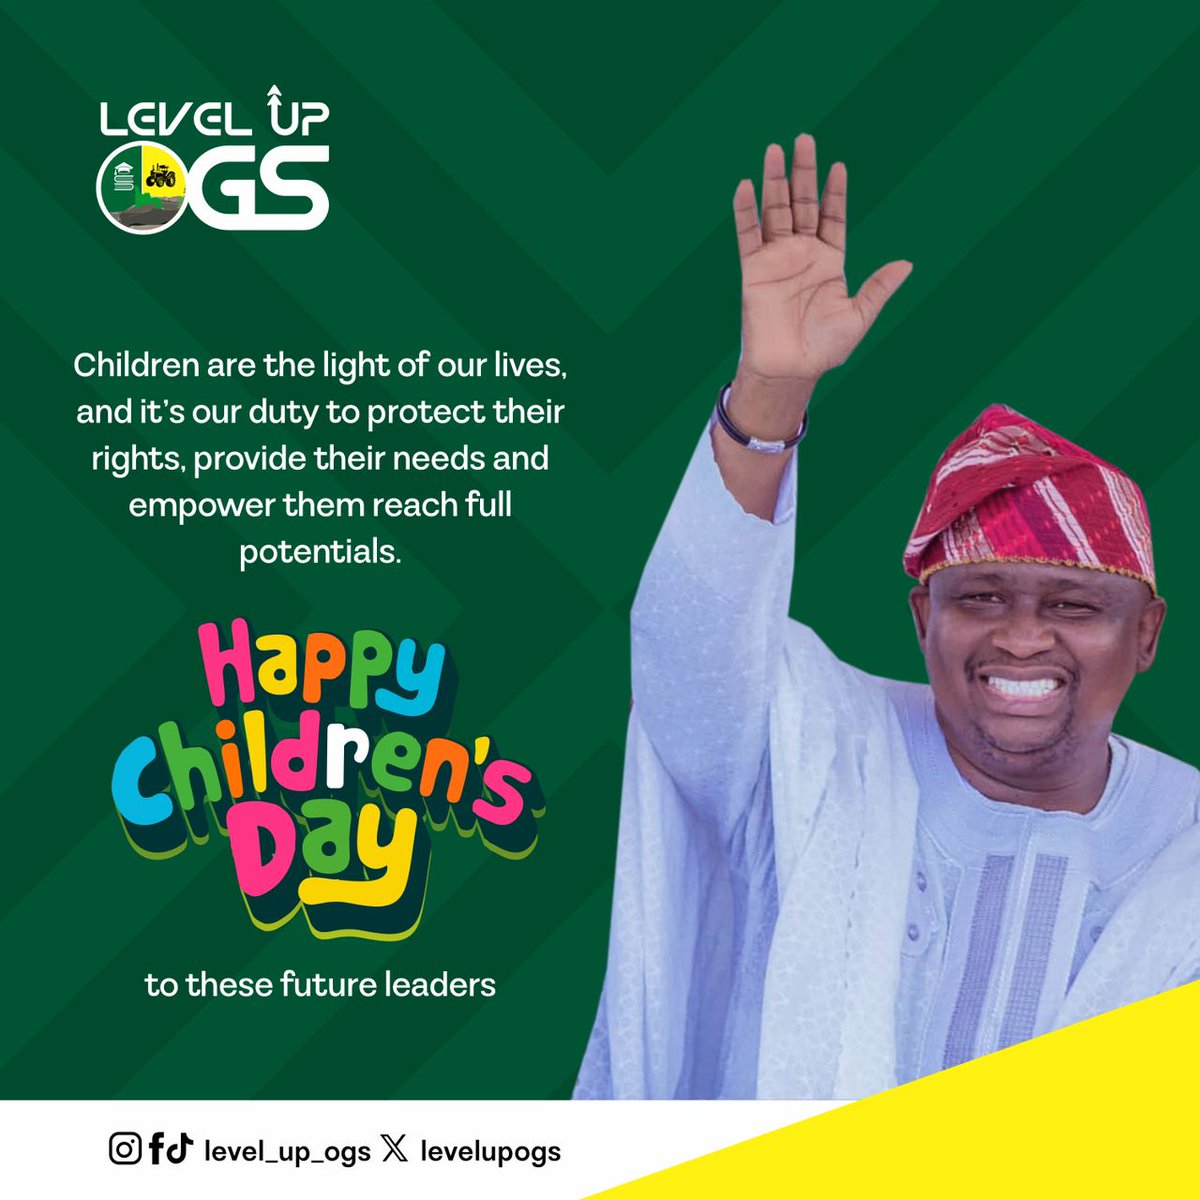 Today and everyday, we celebrate the bright light of our future! Happy Children’s Day to our young leaders, may we continue to protect, provide , and empower them to shine light for the world to see!

#ChildrensDay #SenatorYayi #OgunState #LevelUpOGS #LevelUp4Greatness